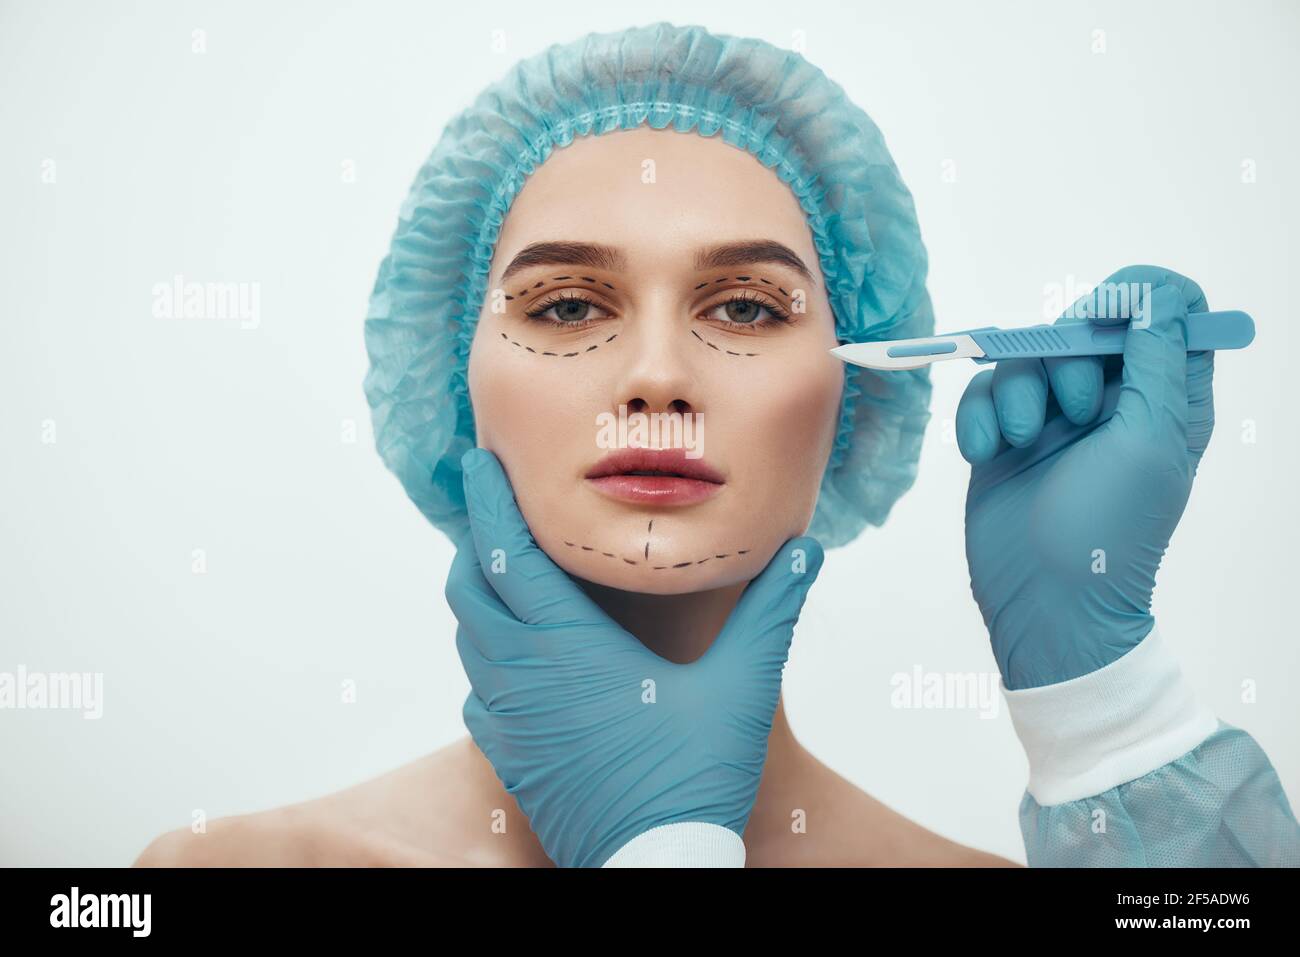 Face lift surgery. Portrait of beautiful young woman in blue medical hat having cosmetic face surgery. Plastic surgeon in blue gloves holding scalpel. Stock Photo